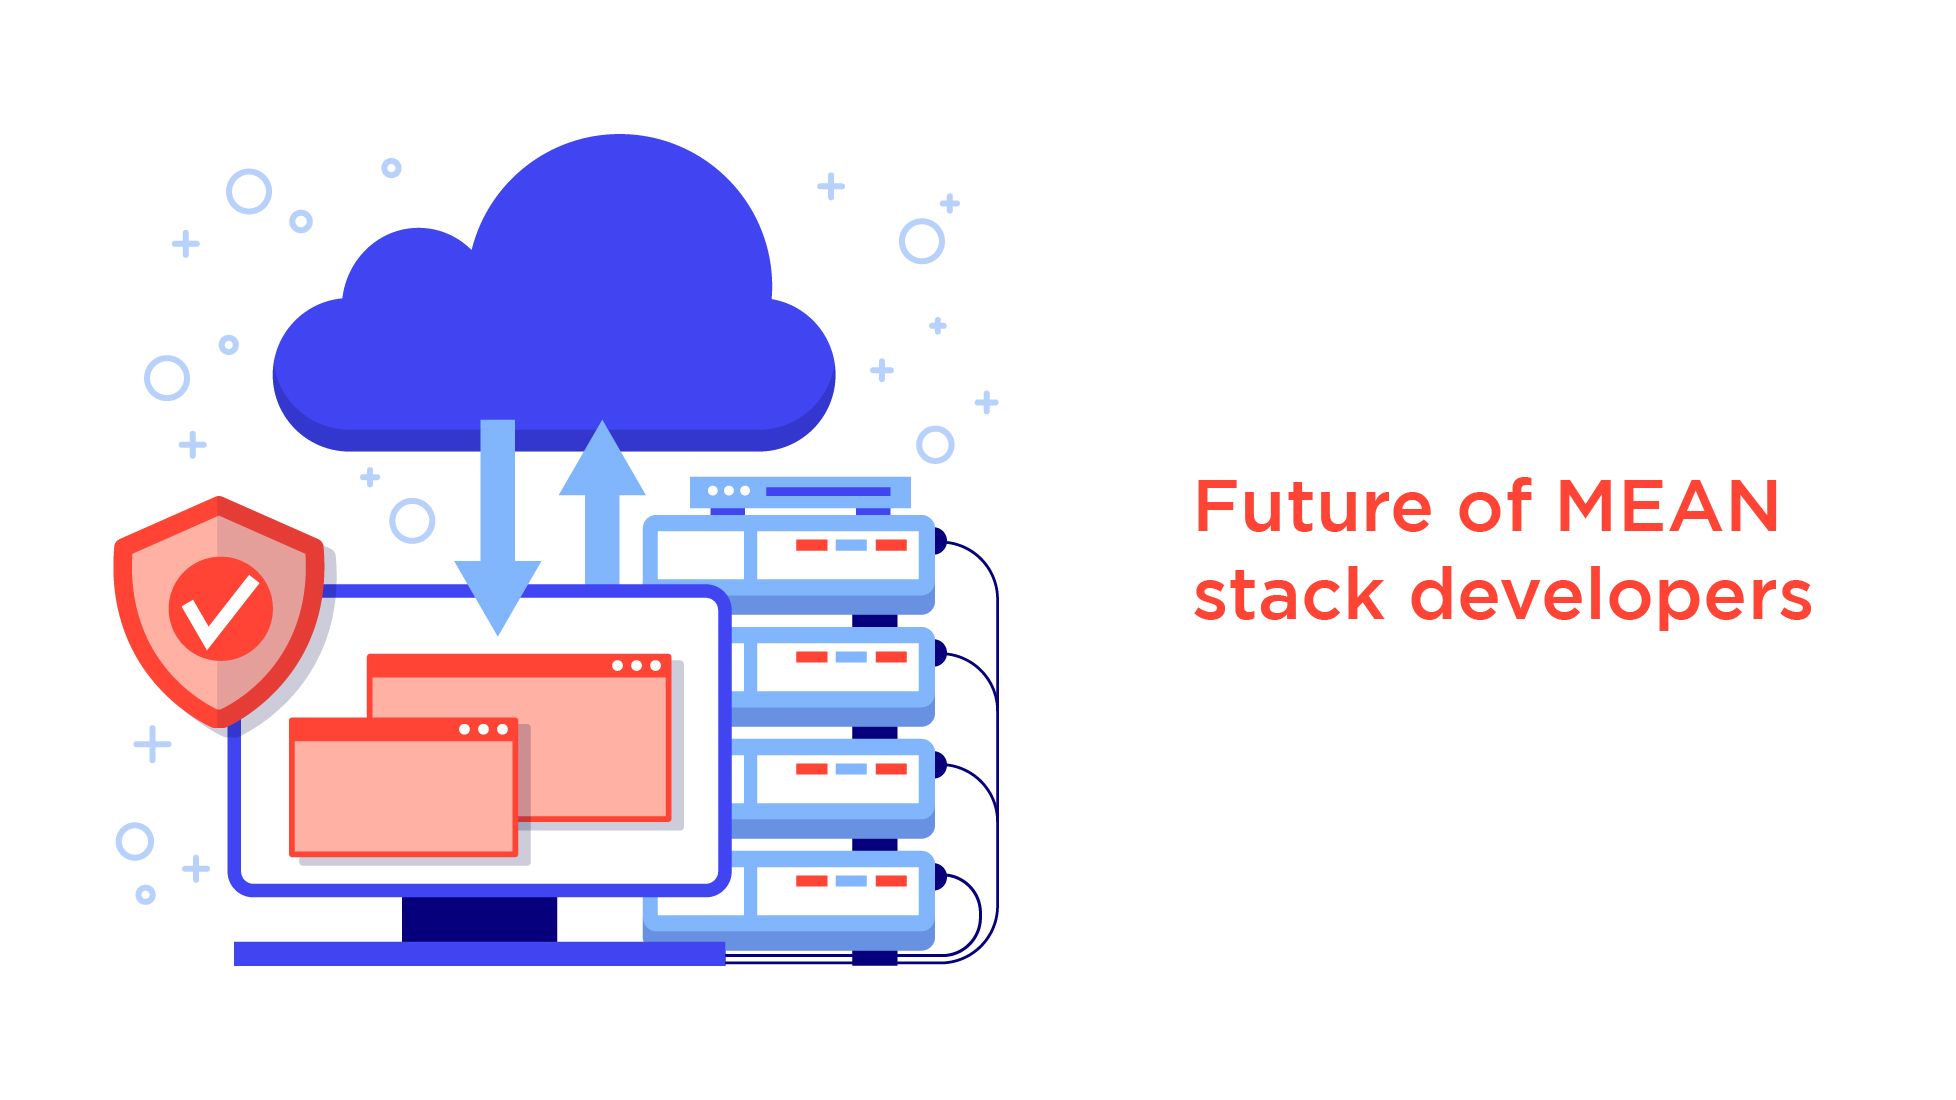 The Future of MEAN stack developers 